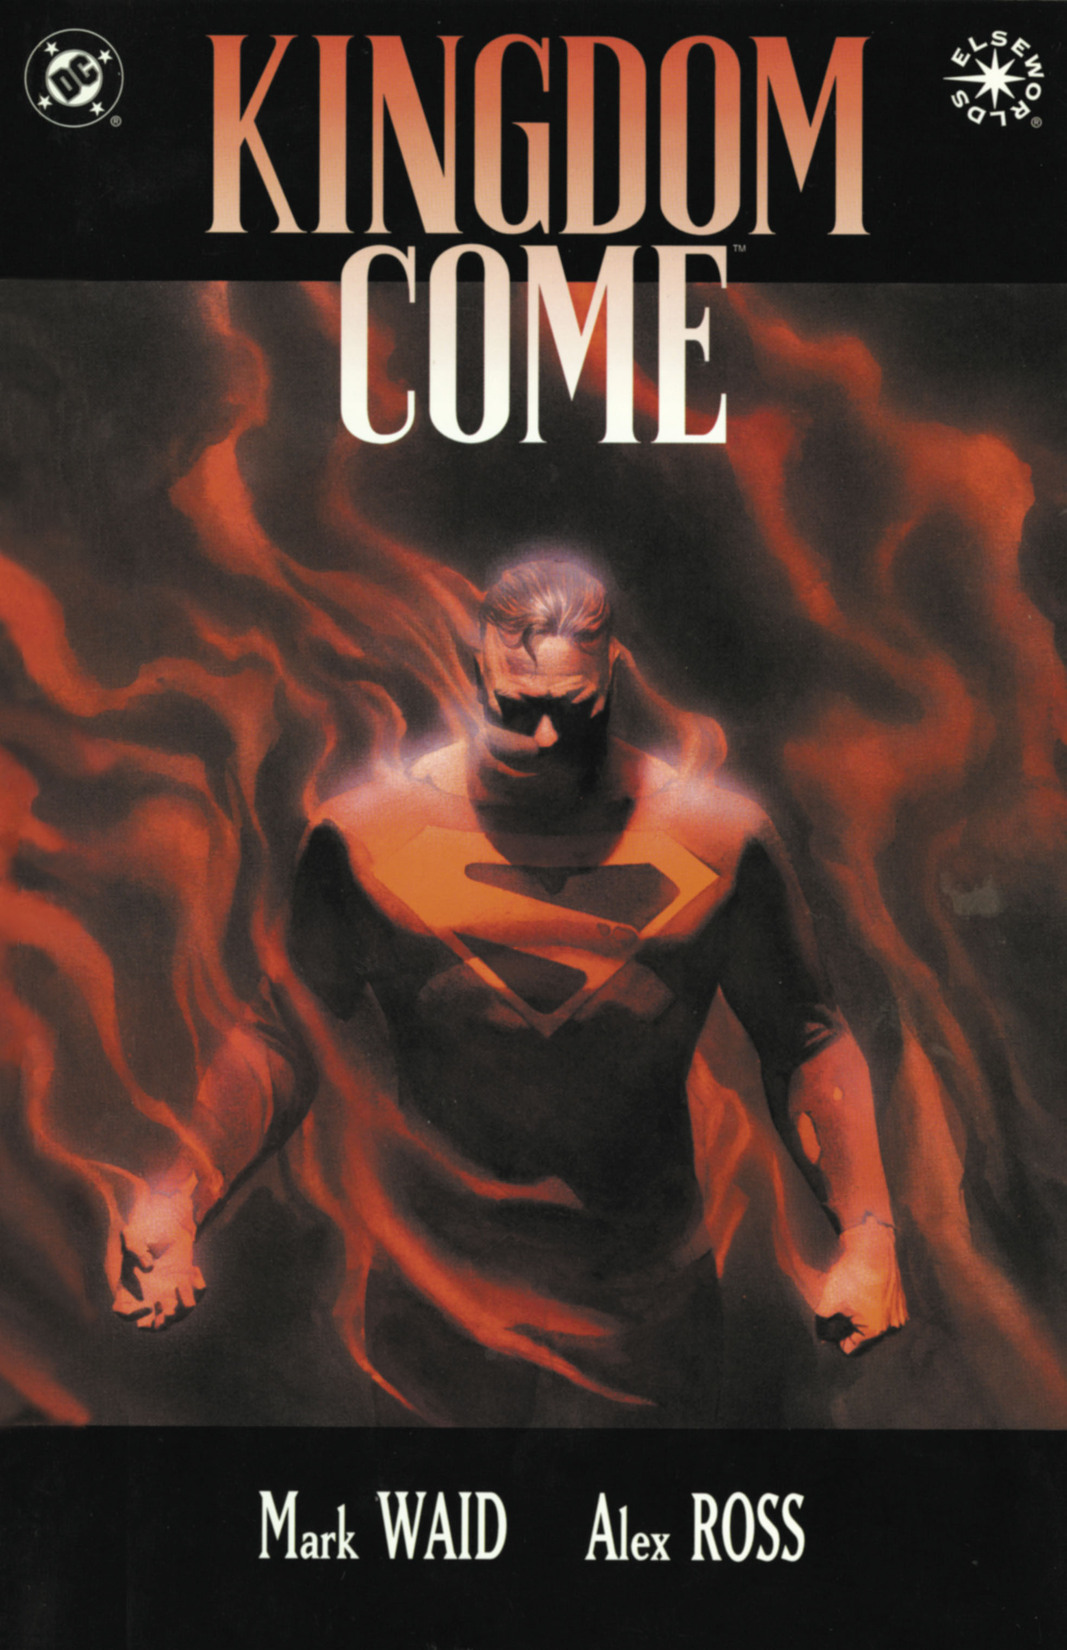 Kingdom Come #4 preview images